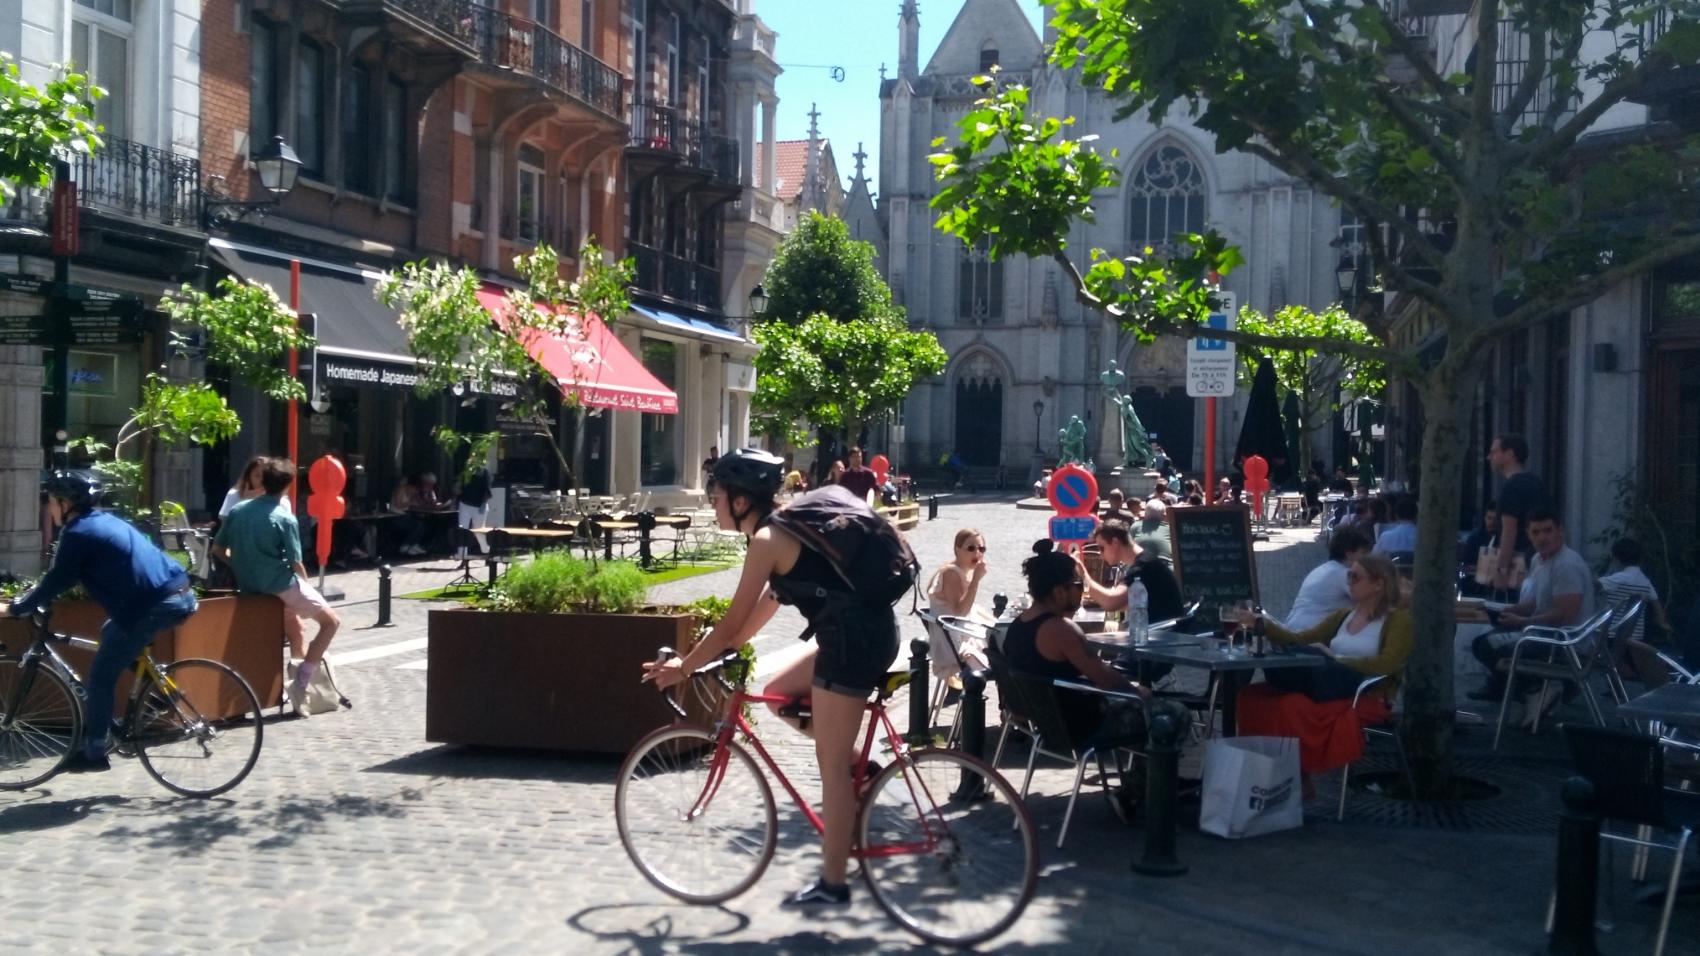 Closing a section of Rue Saint-Boniface for cars provided ample space for outdoor seating for restaurants and cafes.